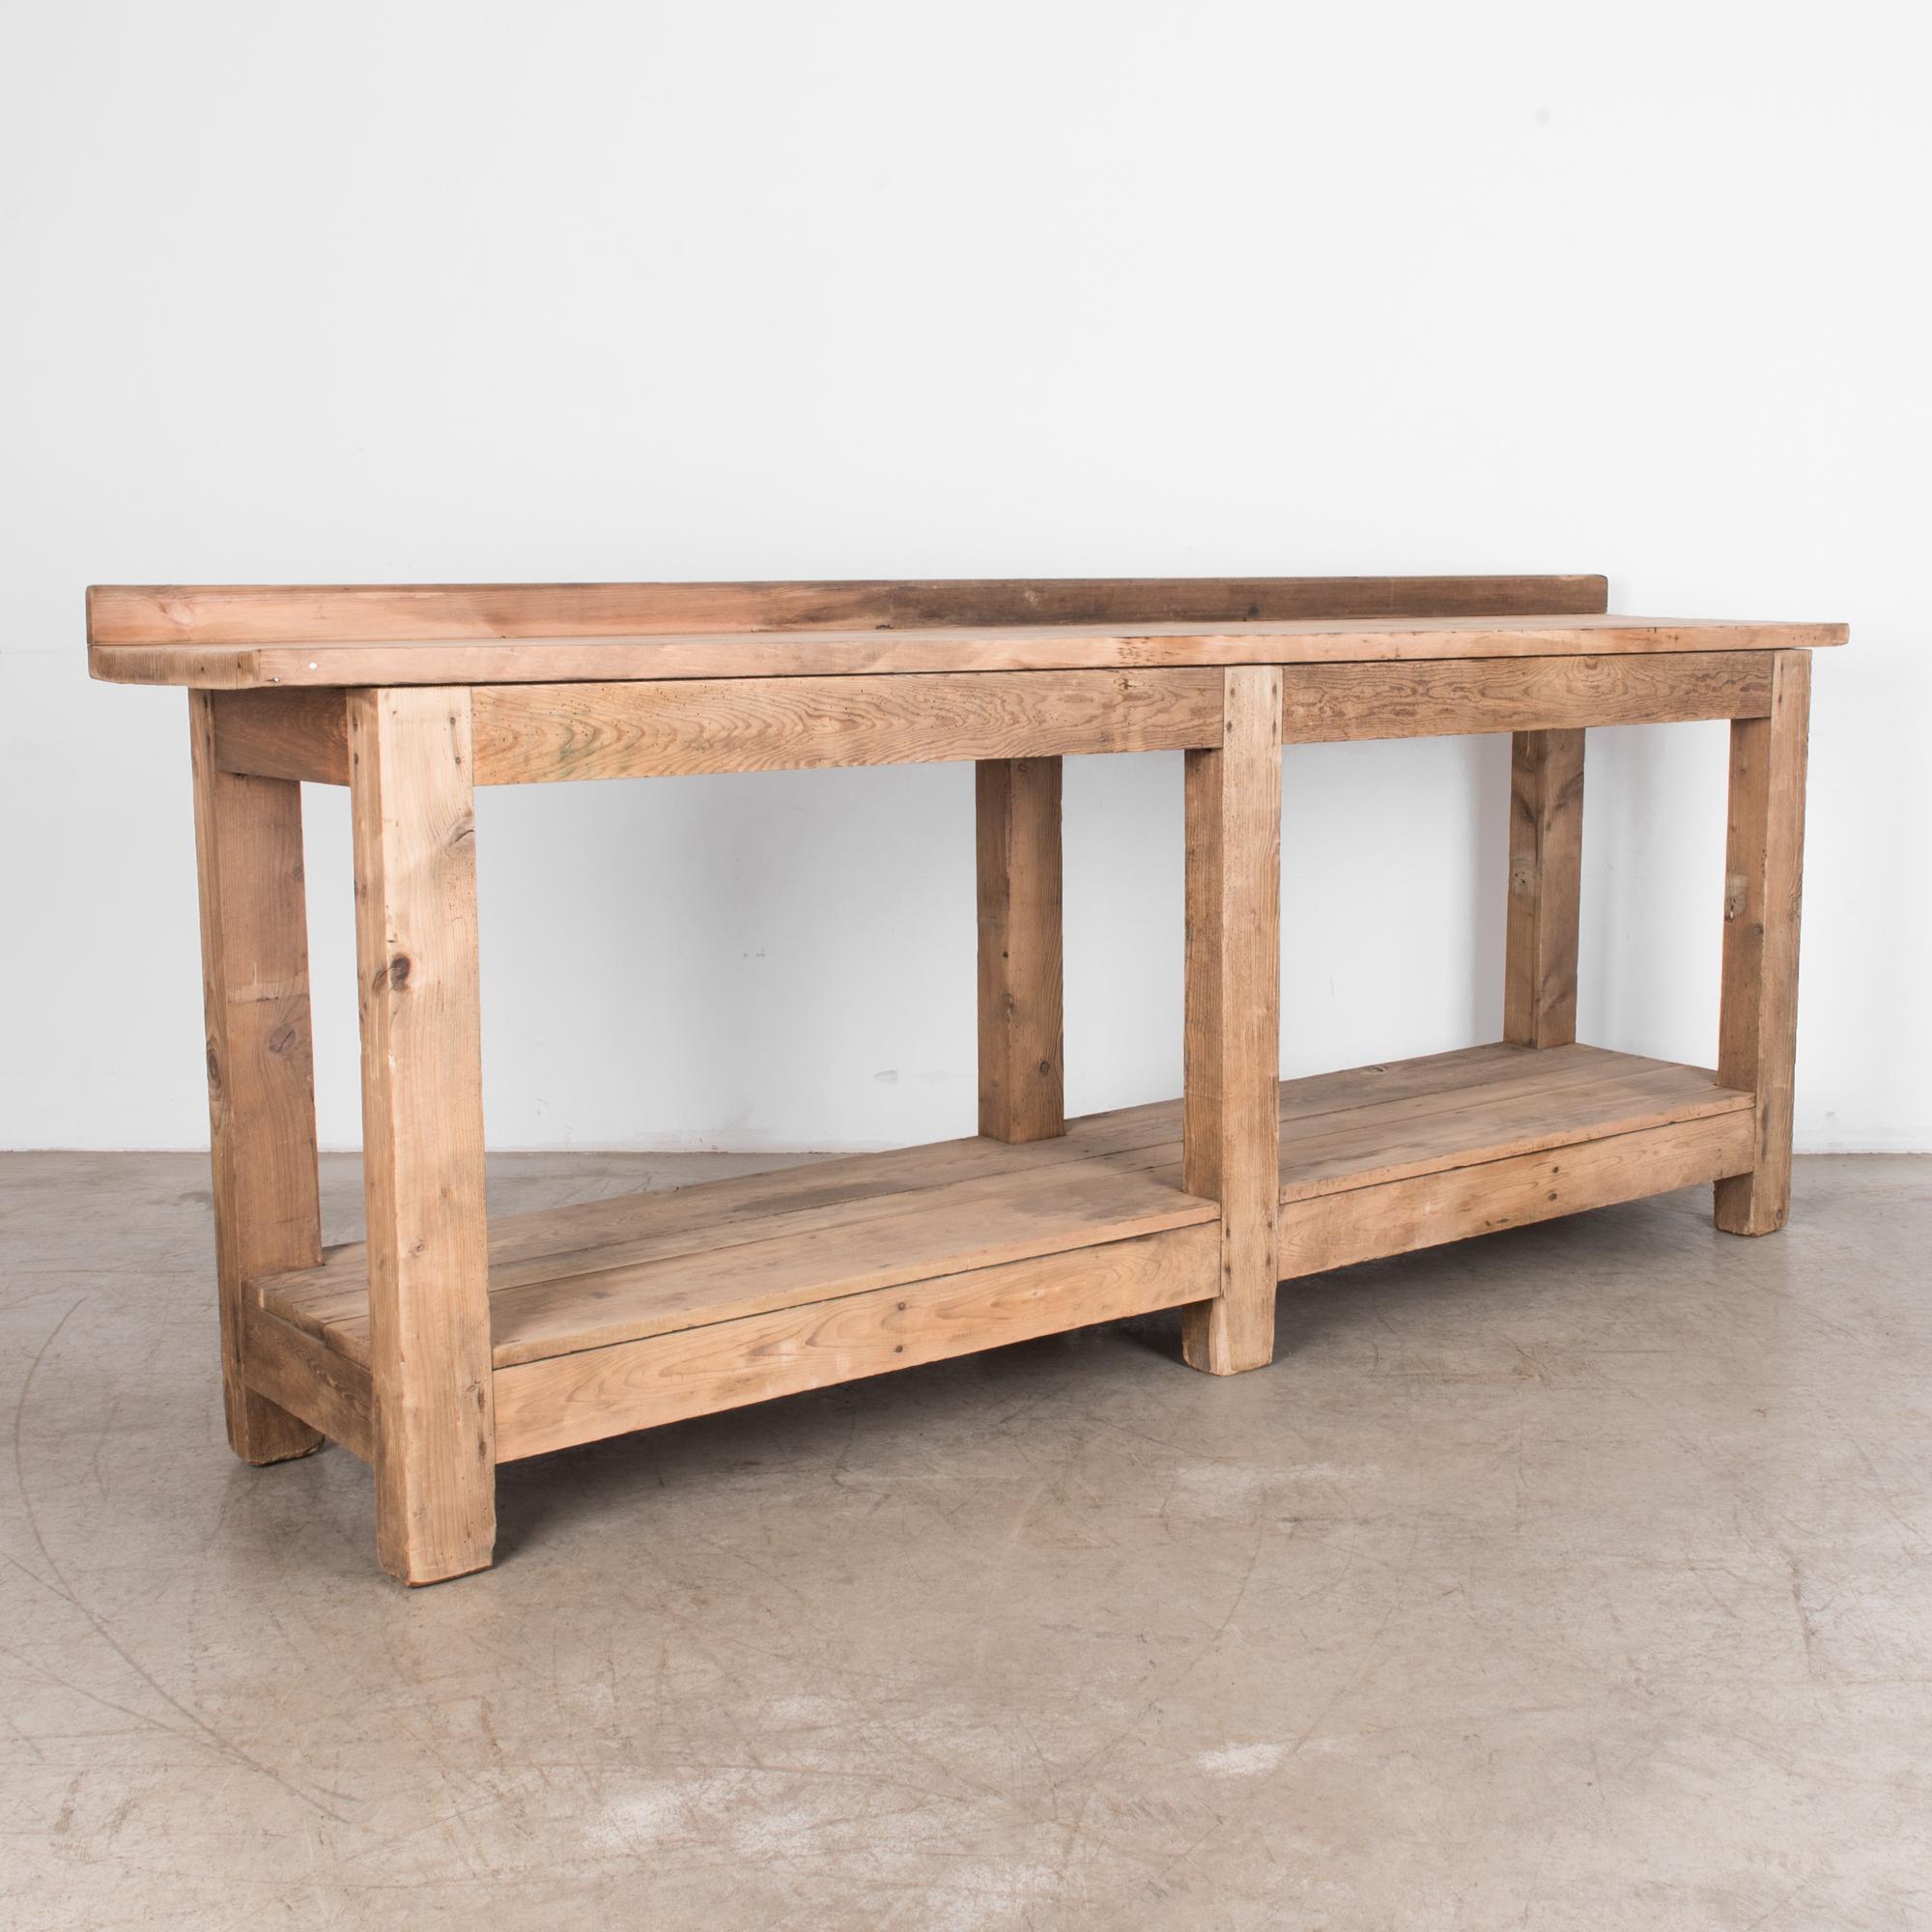 From Belgium circa 1920, a heavy duty wooden table. A weathered finish, for a room that needs character. Equipped with a practical and structural lower shelf, all supported by a sturdy frame and thick legs, realized in natural finished softwood,